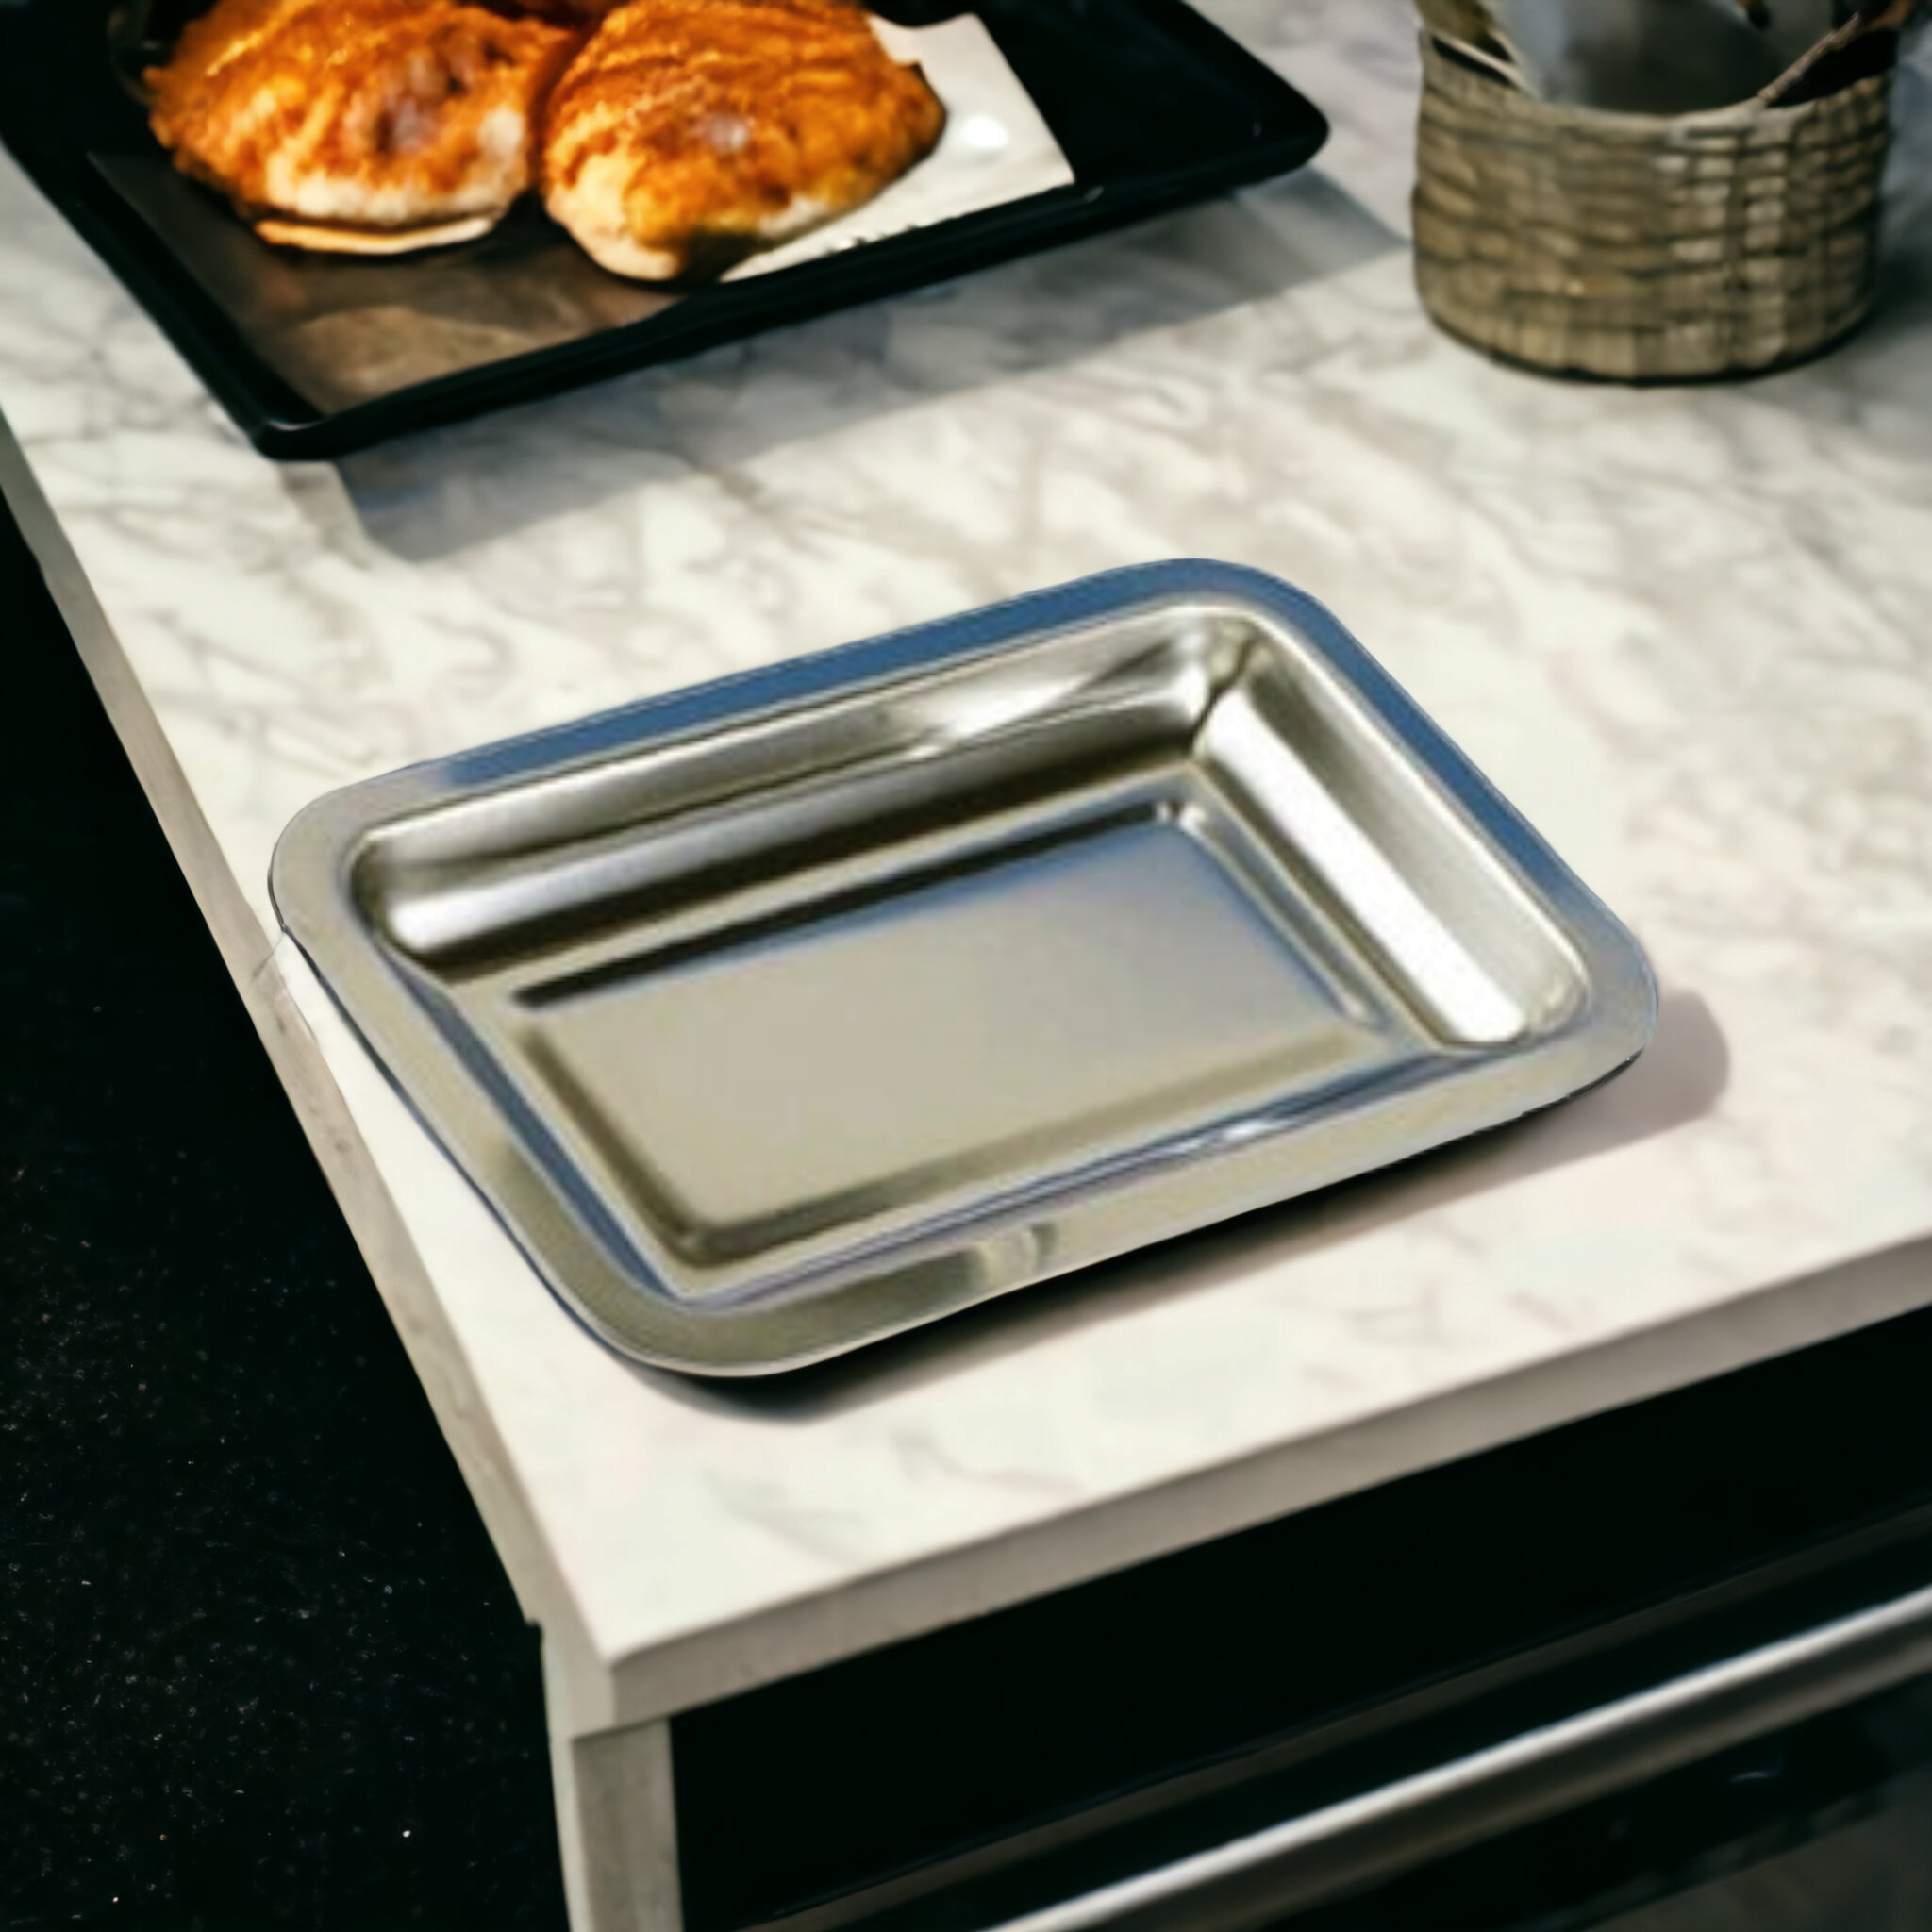 Stainless Steel Baking Instrument Tray 32x22cm